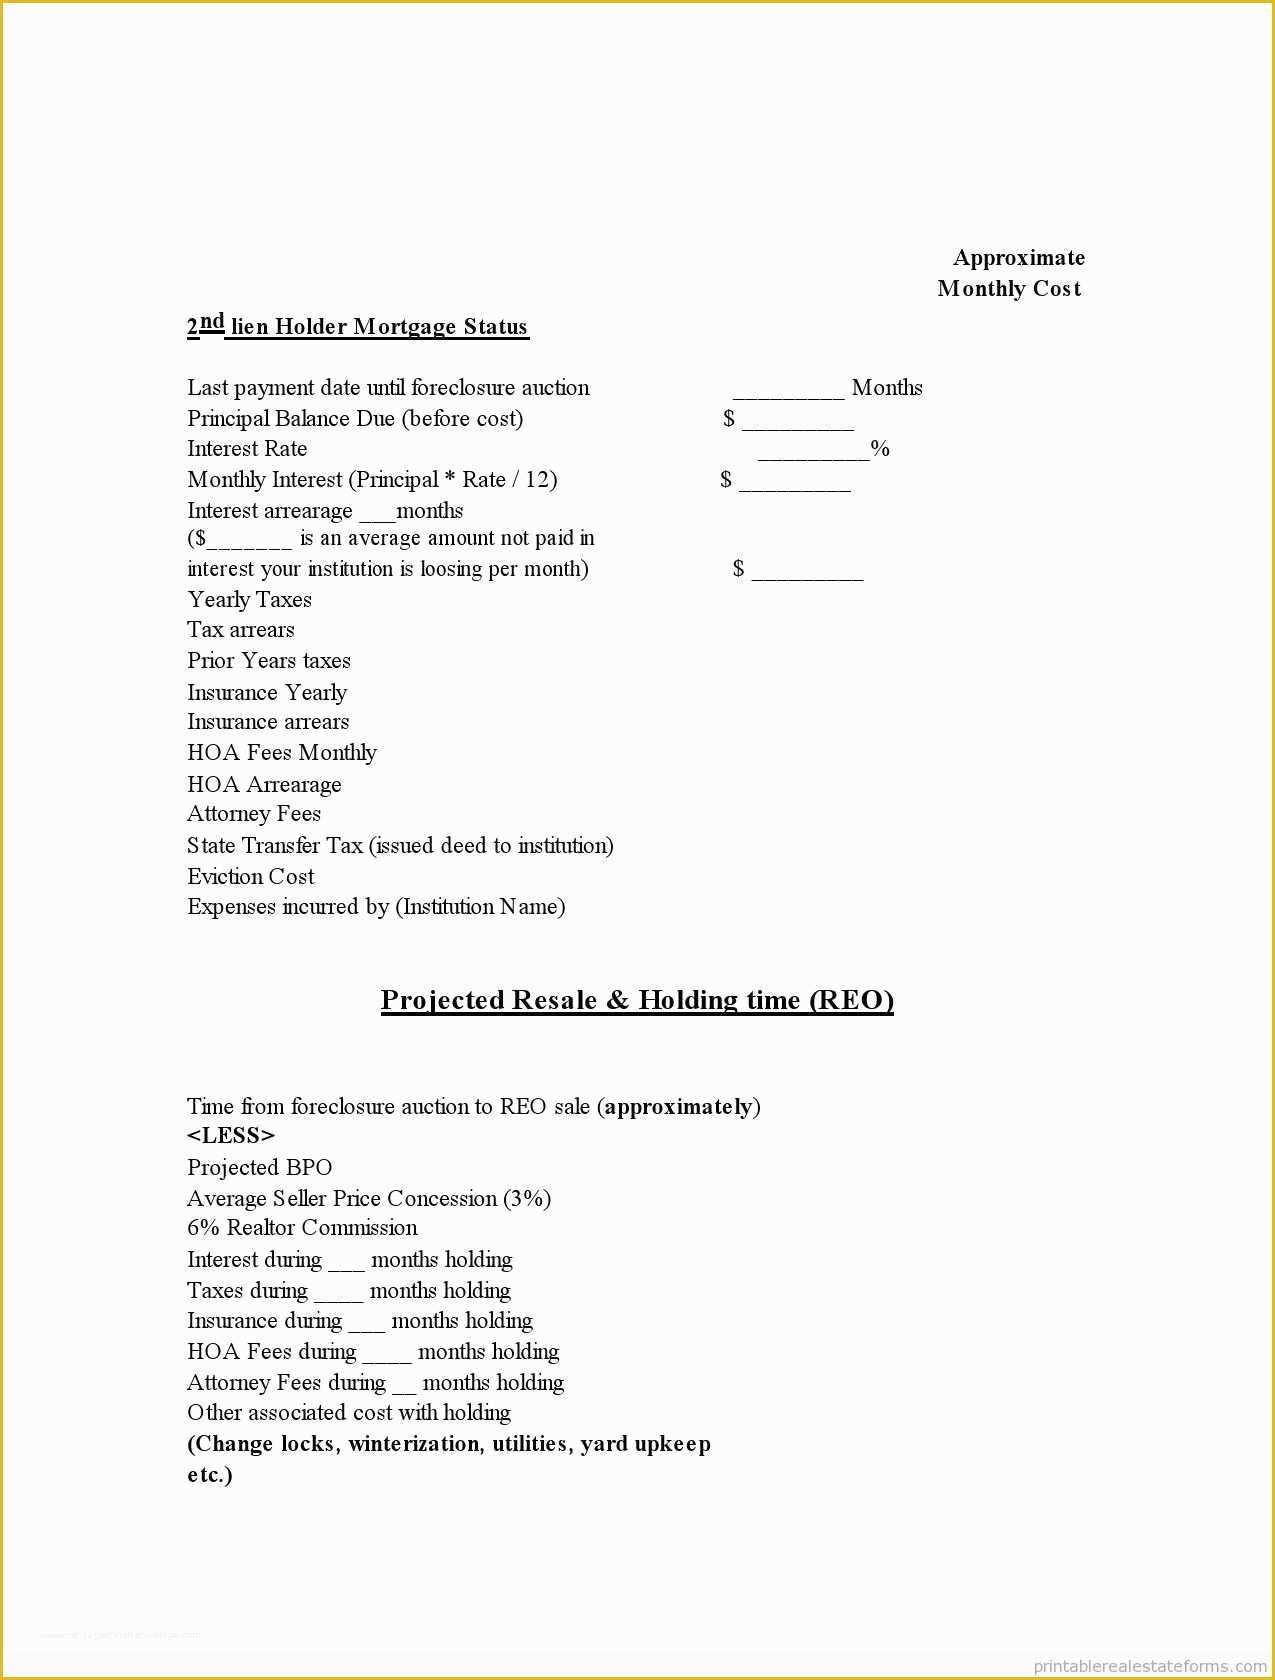 Free foreclosure Letter Template Of Printable Copy Of Projected foreclosure to Reo Cost